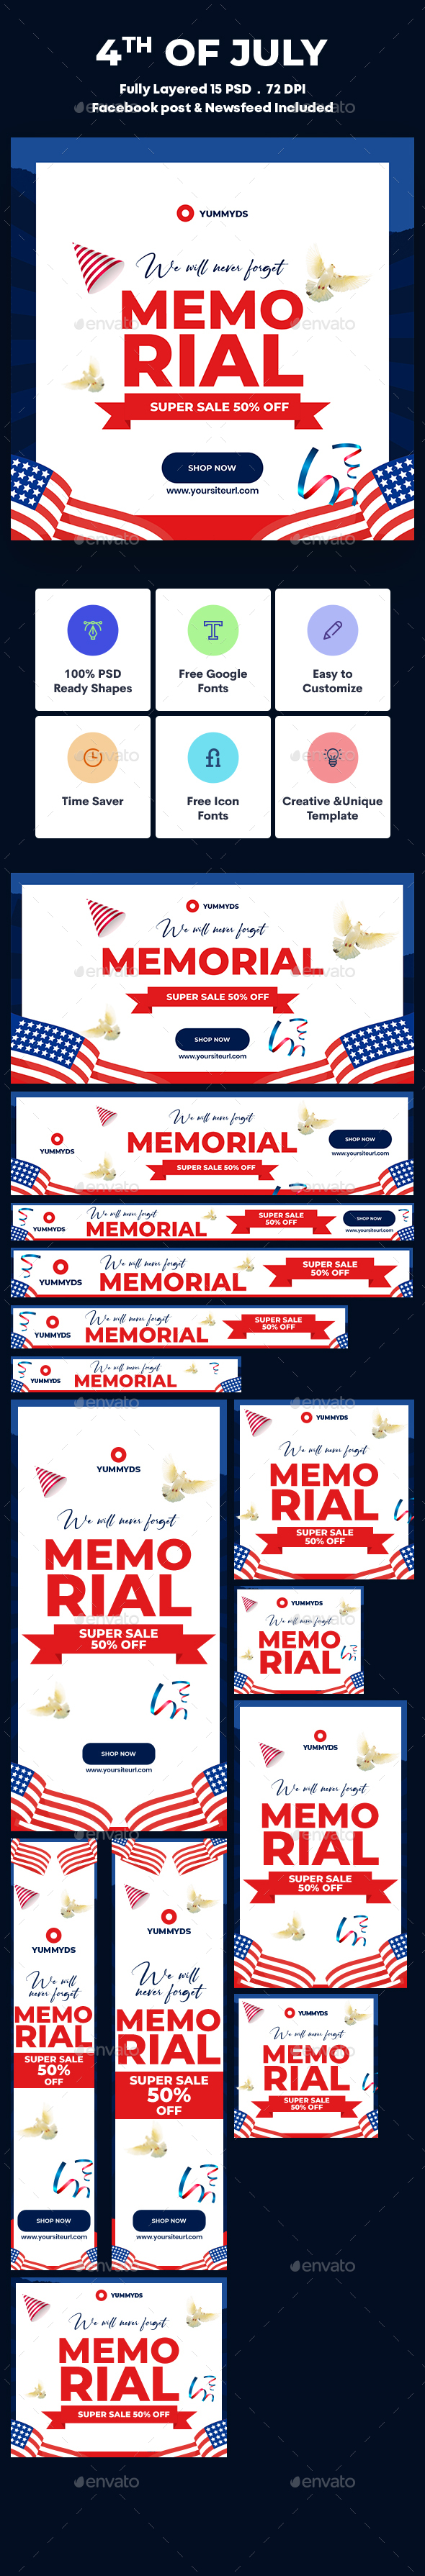 4th of July Banners Ad